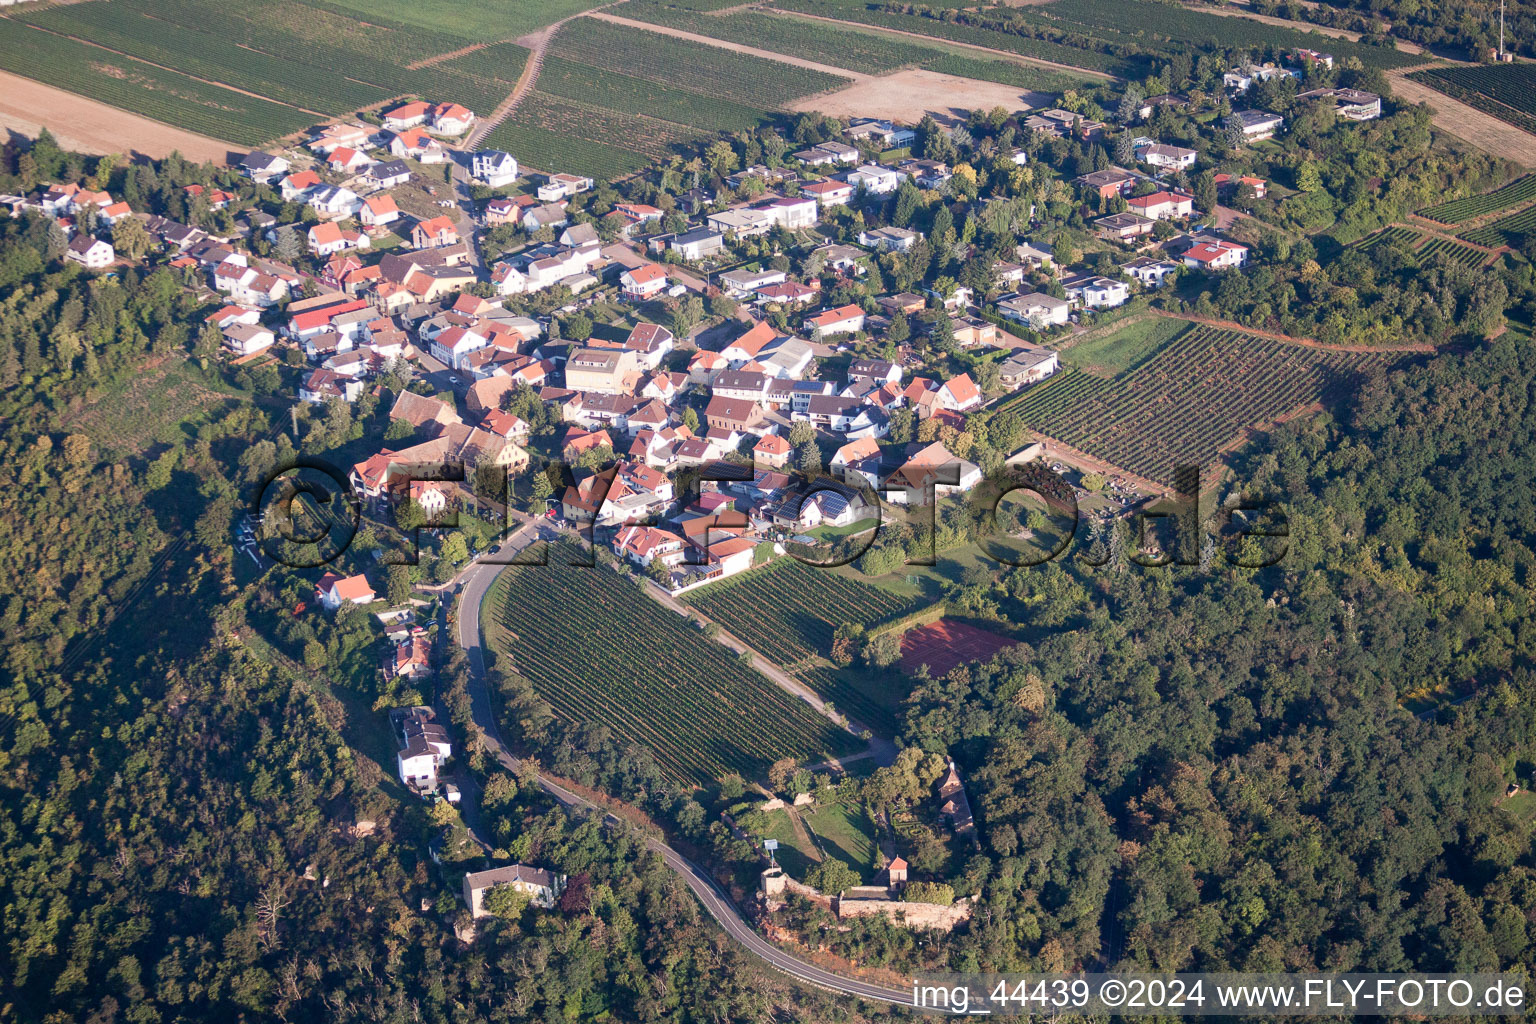 Village view of Am Muenchberg in Bobenheim am Berg in the state Rhineland-Palatinate from above